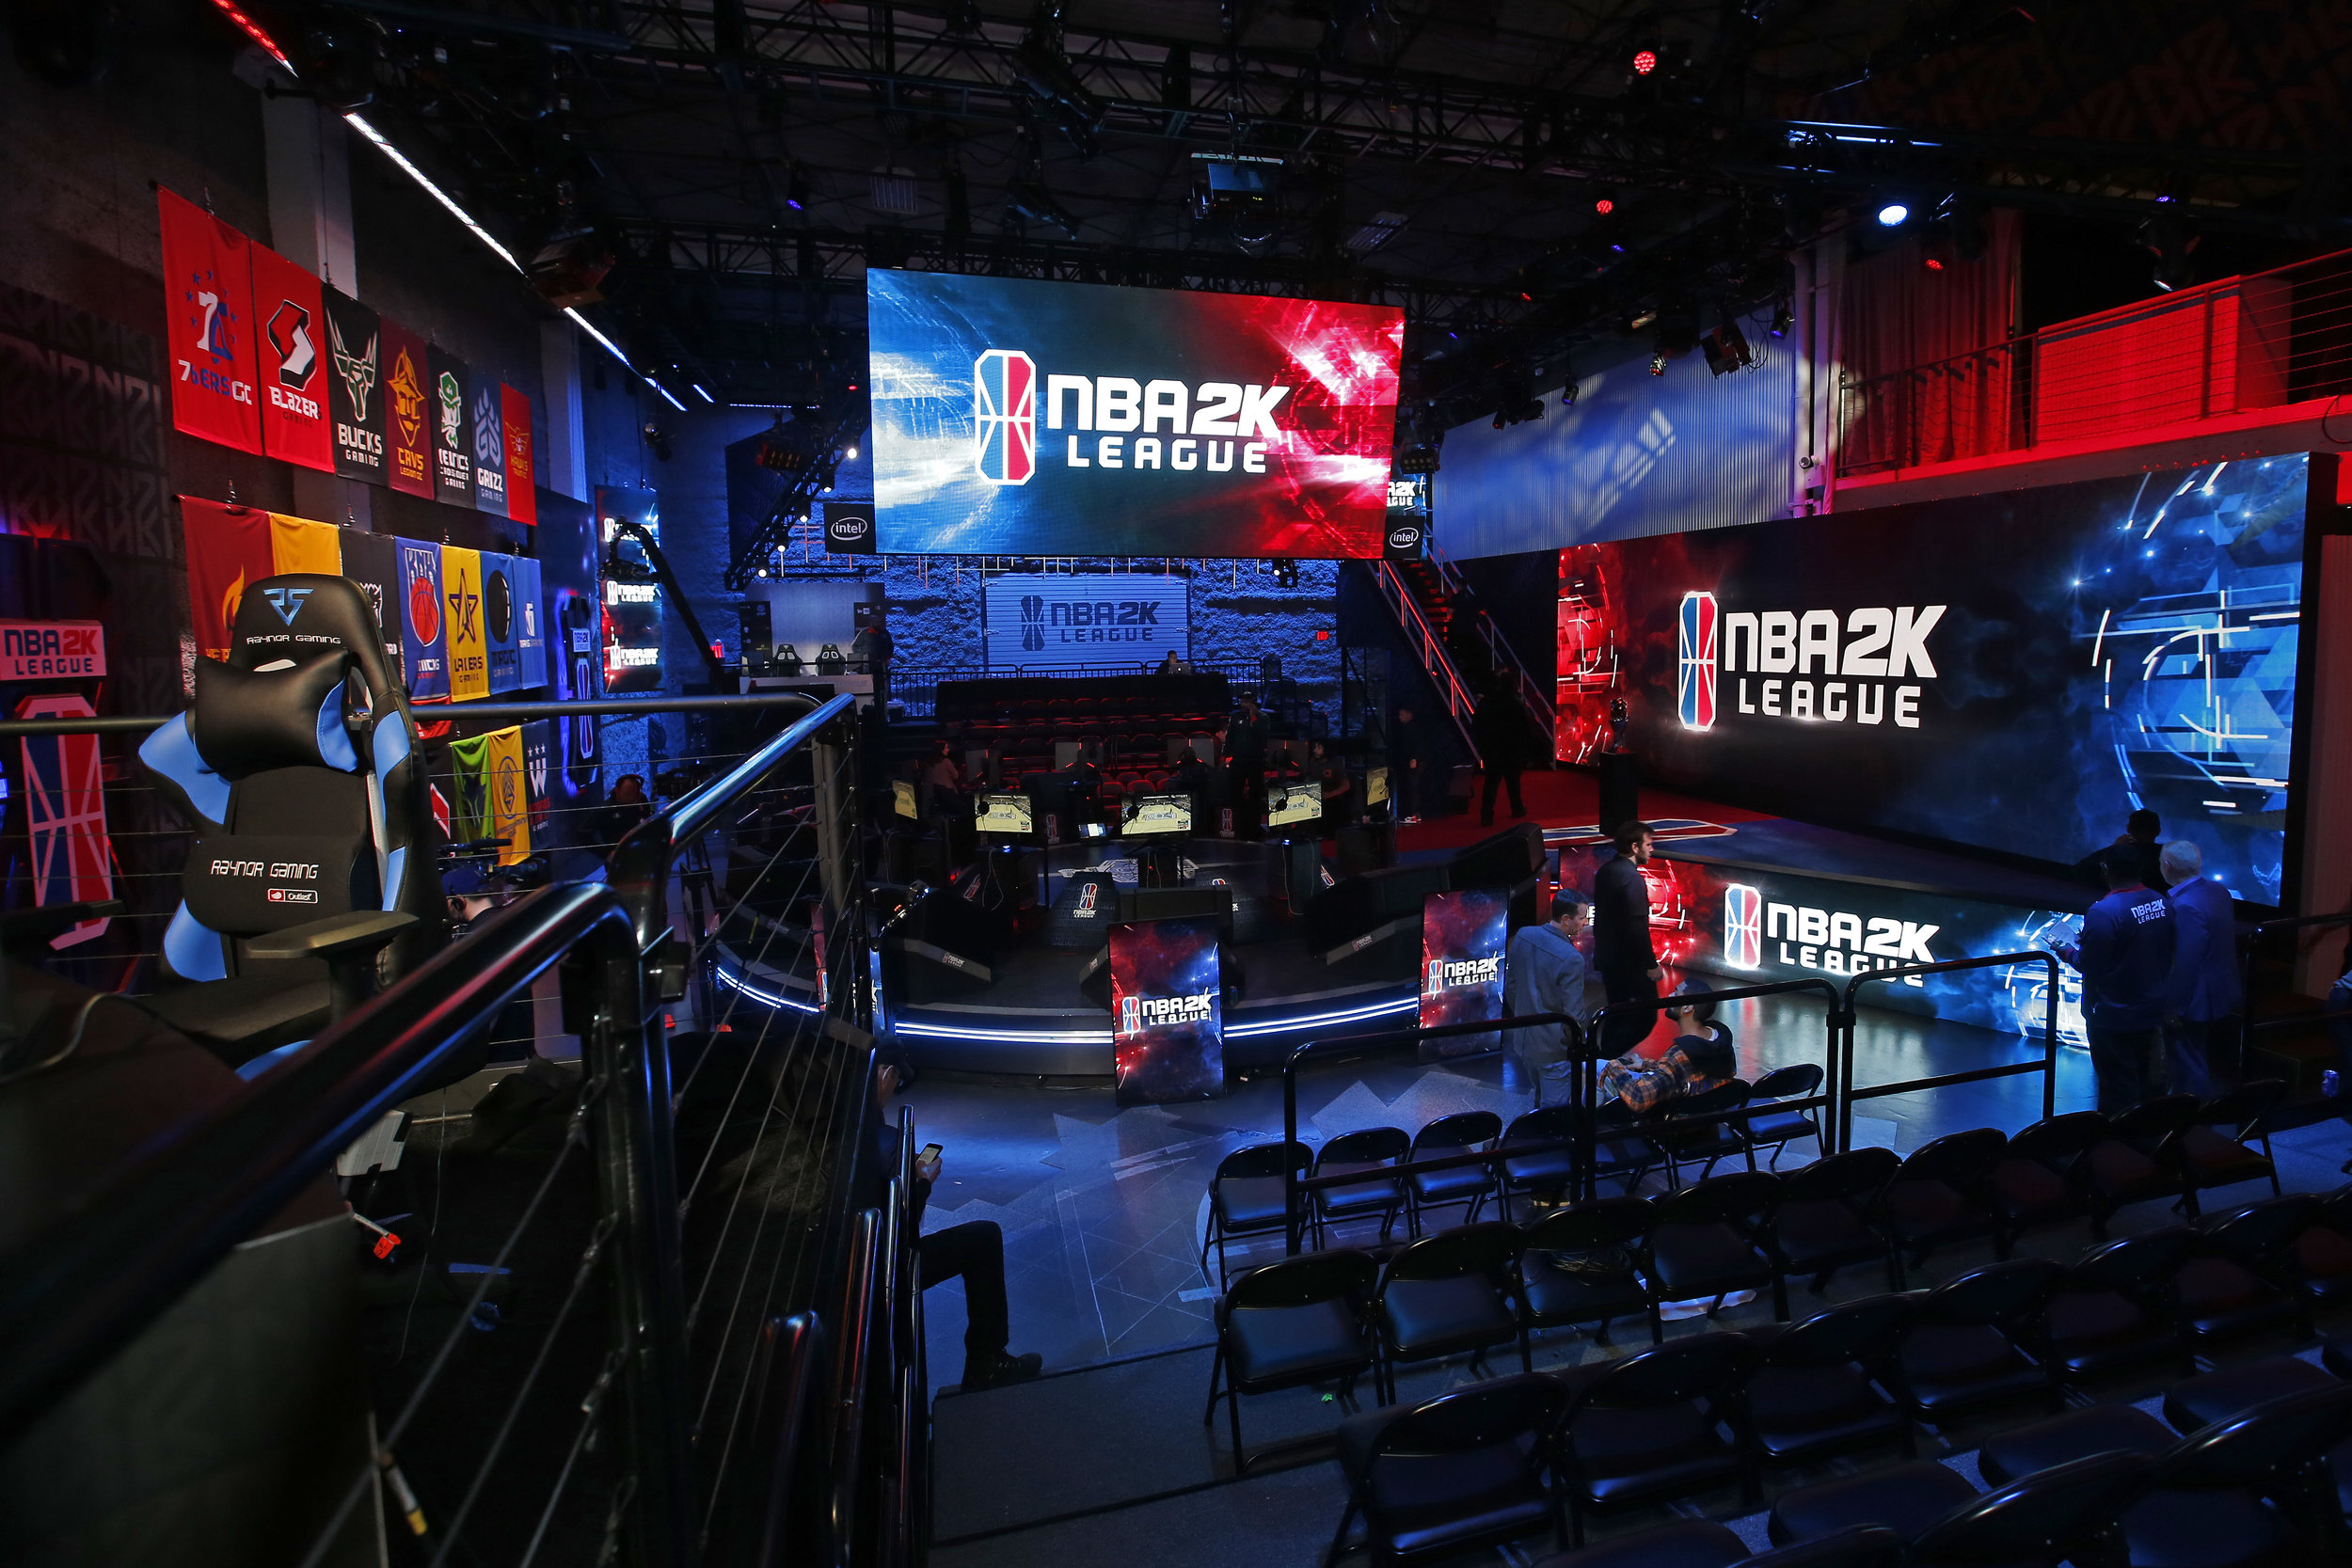 Can eSports ever rival the popularity of live sports? The NBA 2K League may hold the answer